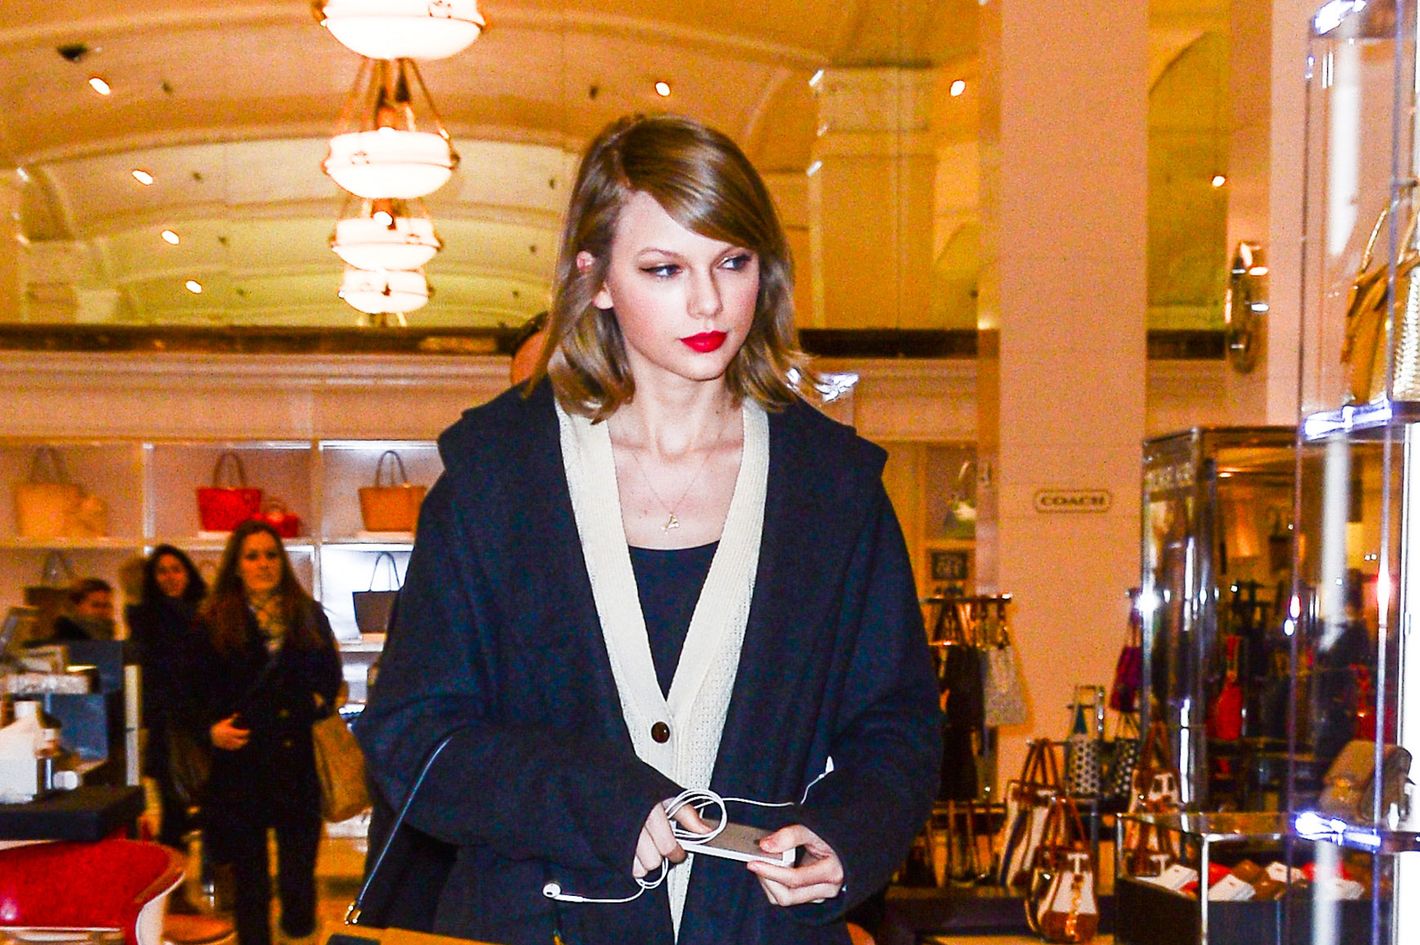 Taylor Swift Fulfills the Lord & Taylor Pun, Without Lorde